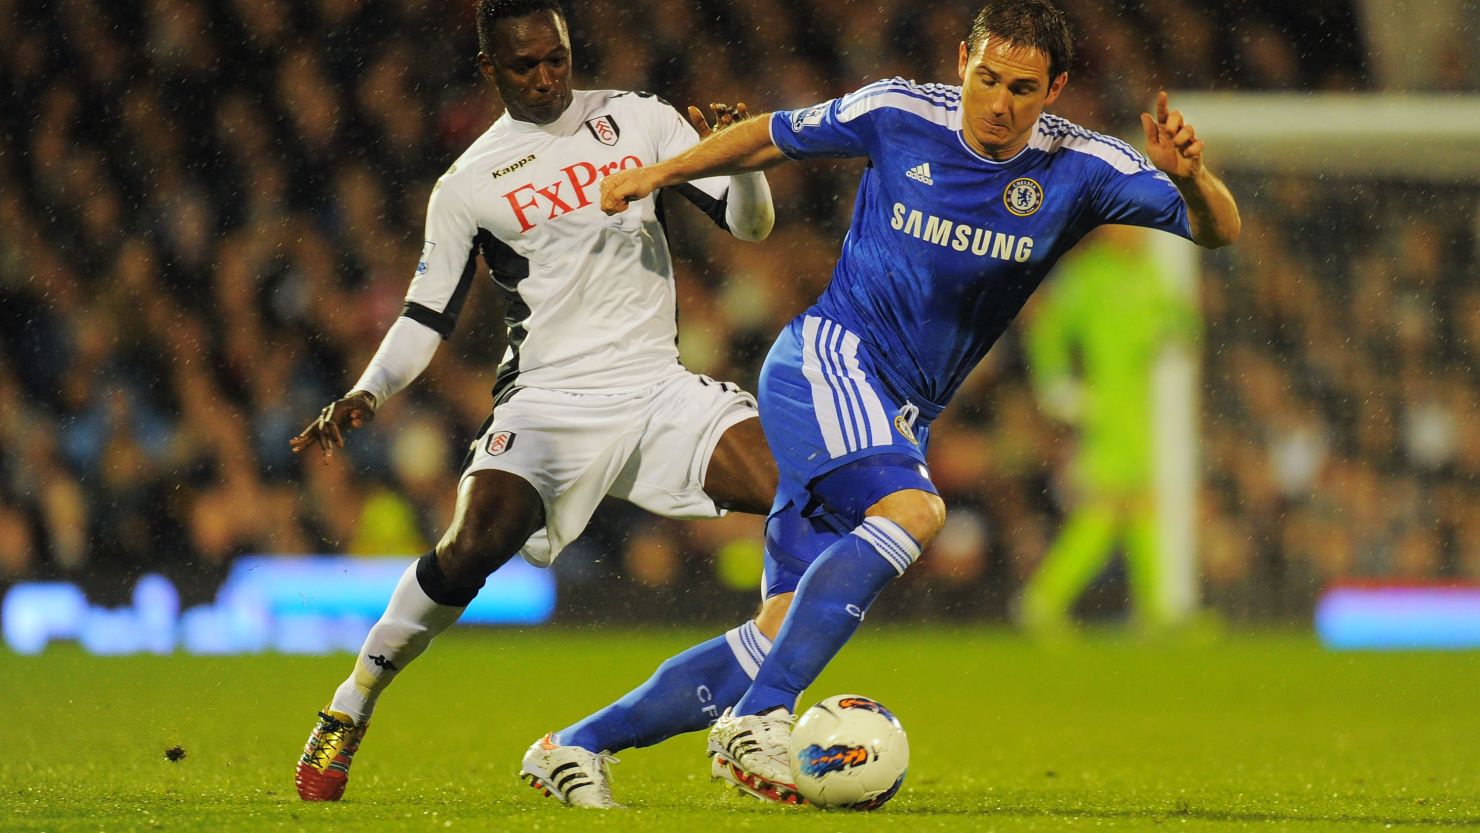 Chelsea's Frank Lampard netted his 150th English Premier League goal against Fulham on Monday night 